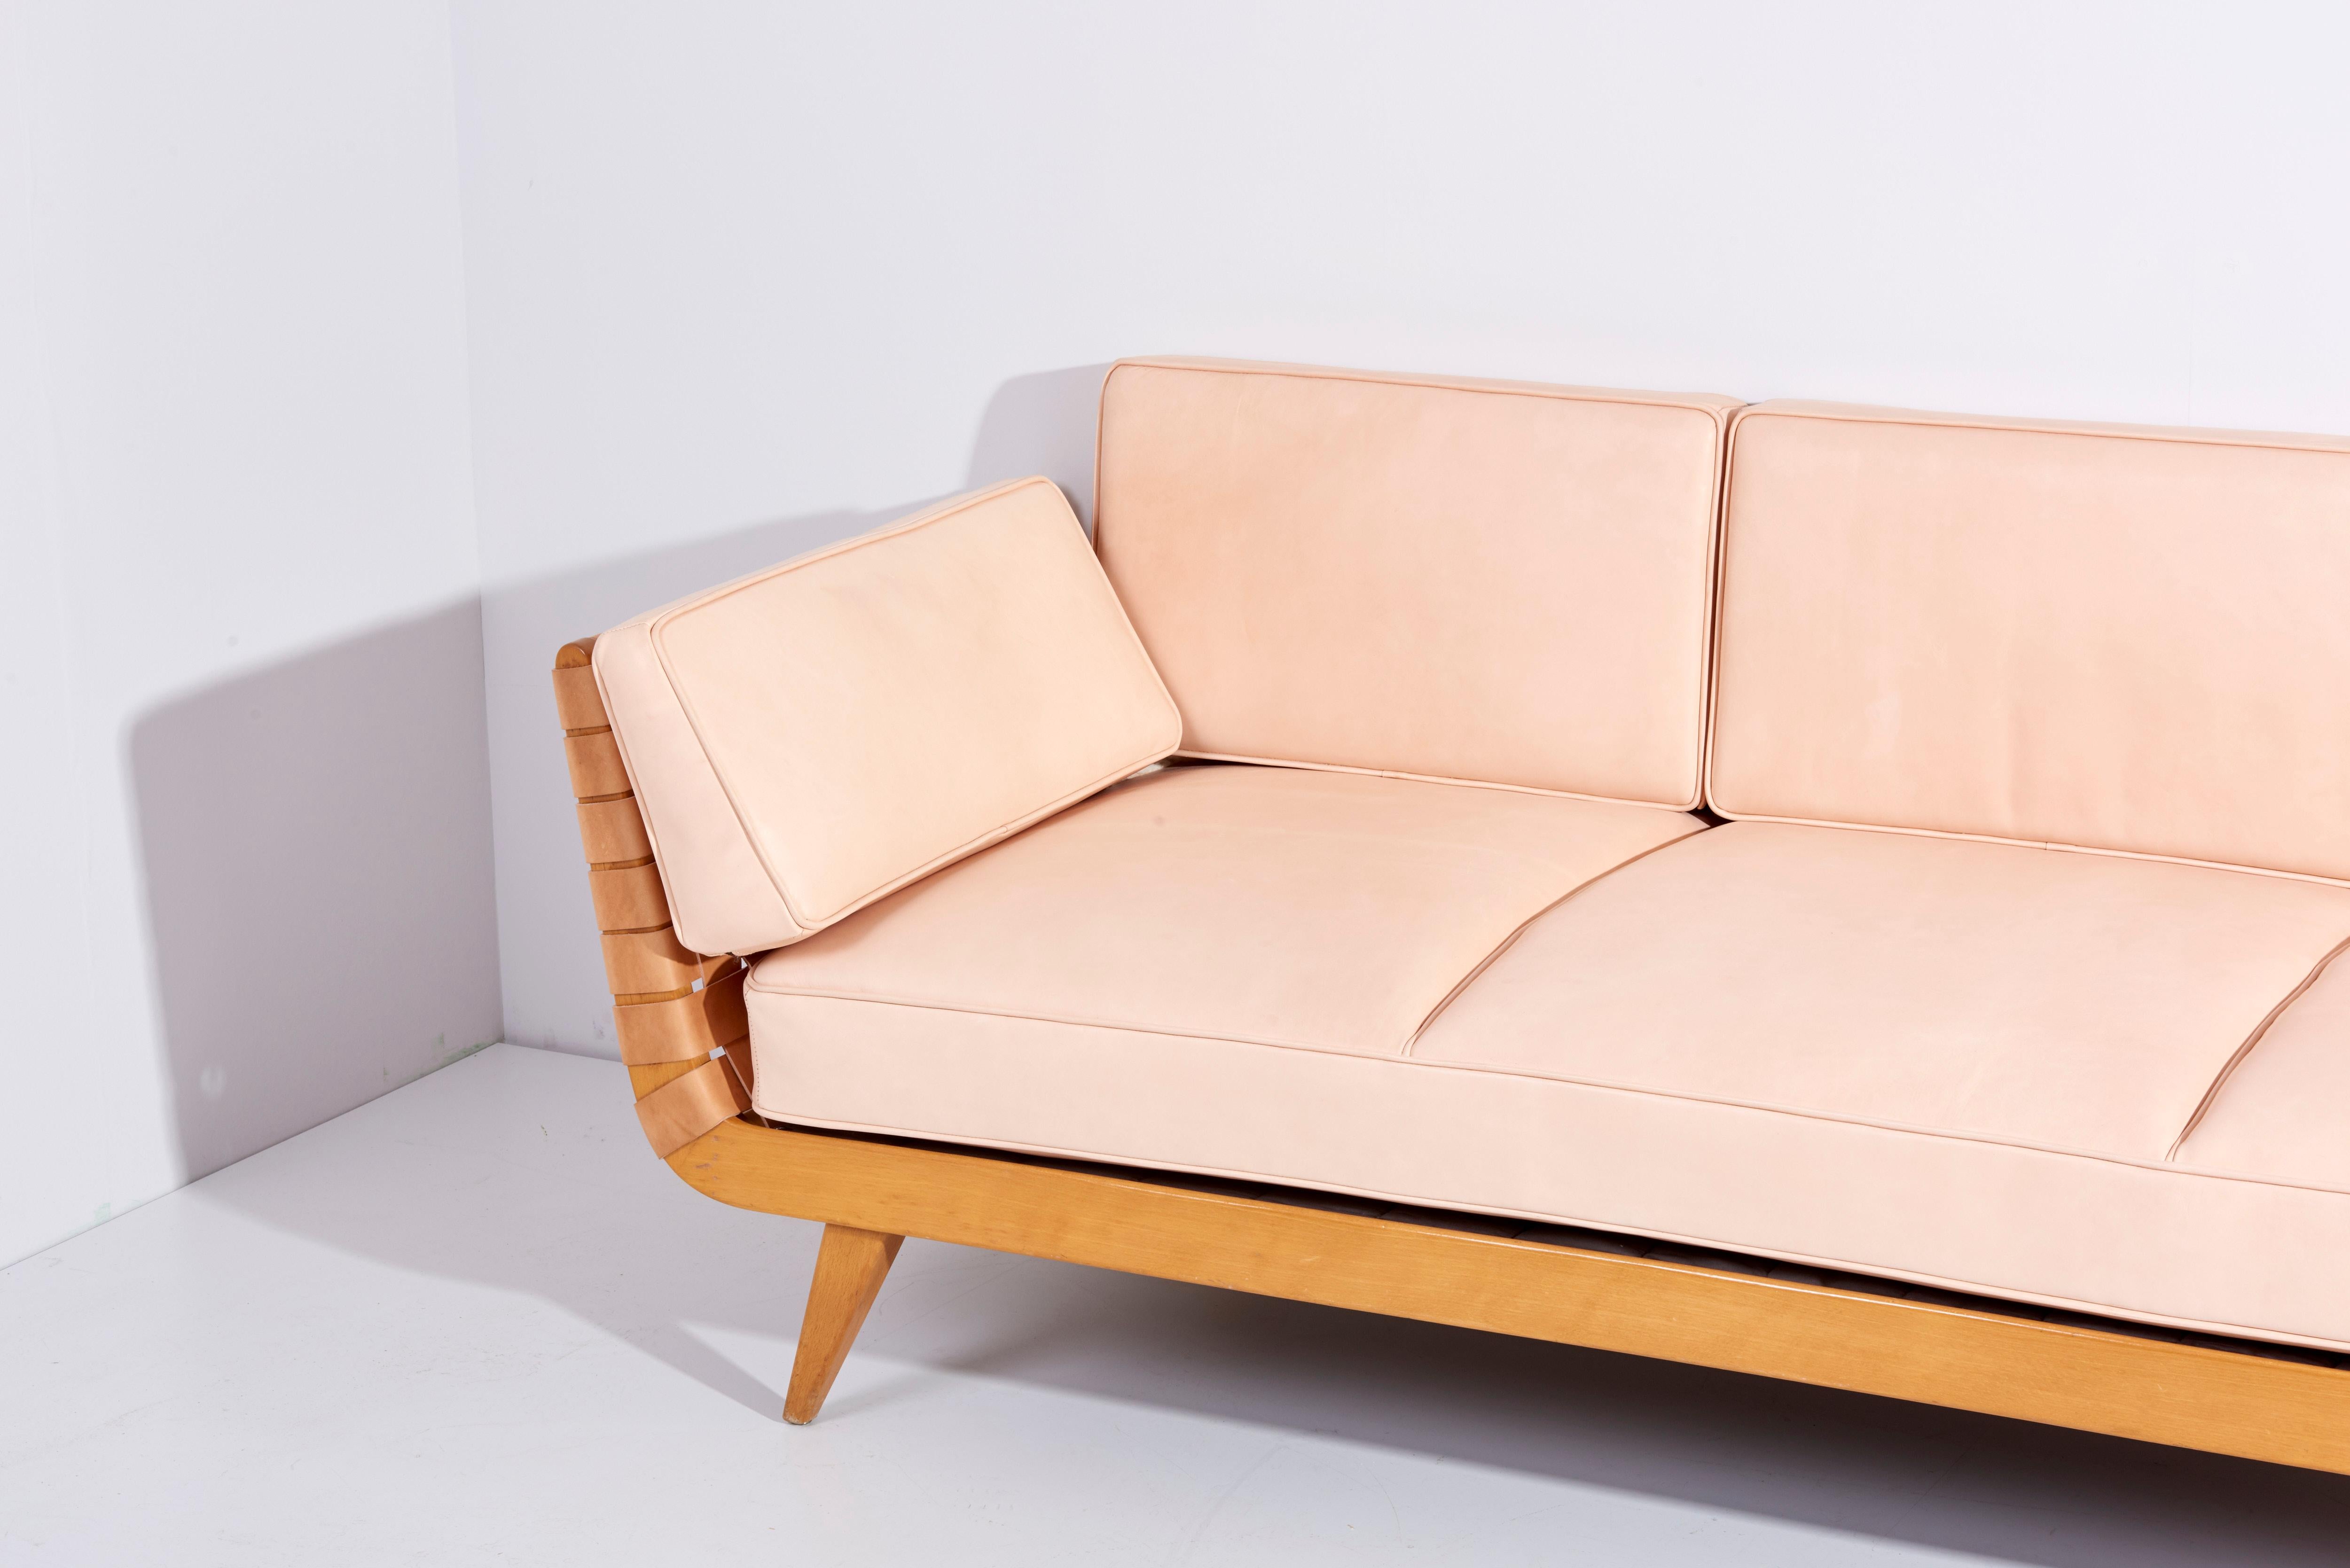 Mid-Century Modern Newly Upholstered Daybed by Jens Risom for Walter Knoll 1950s in Leather